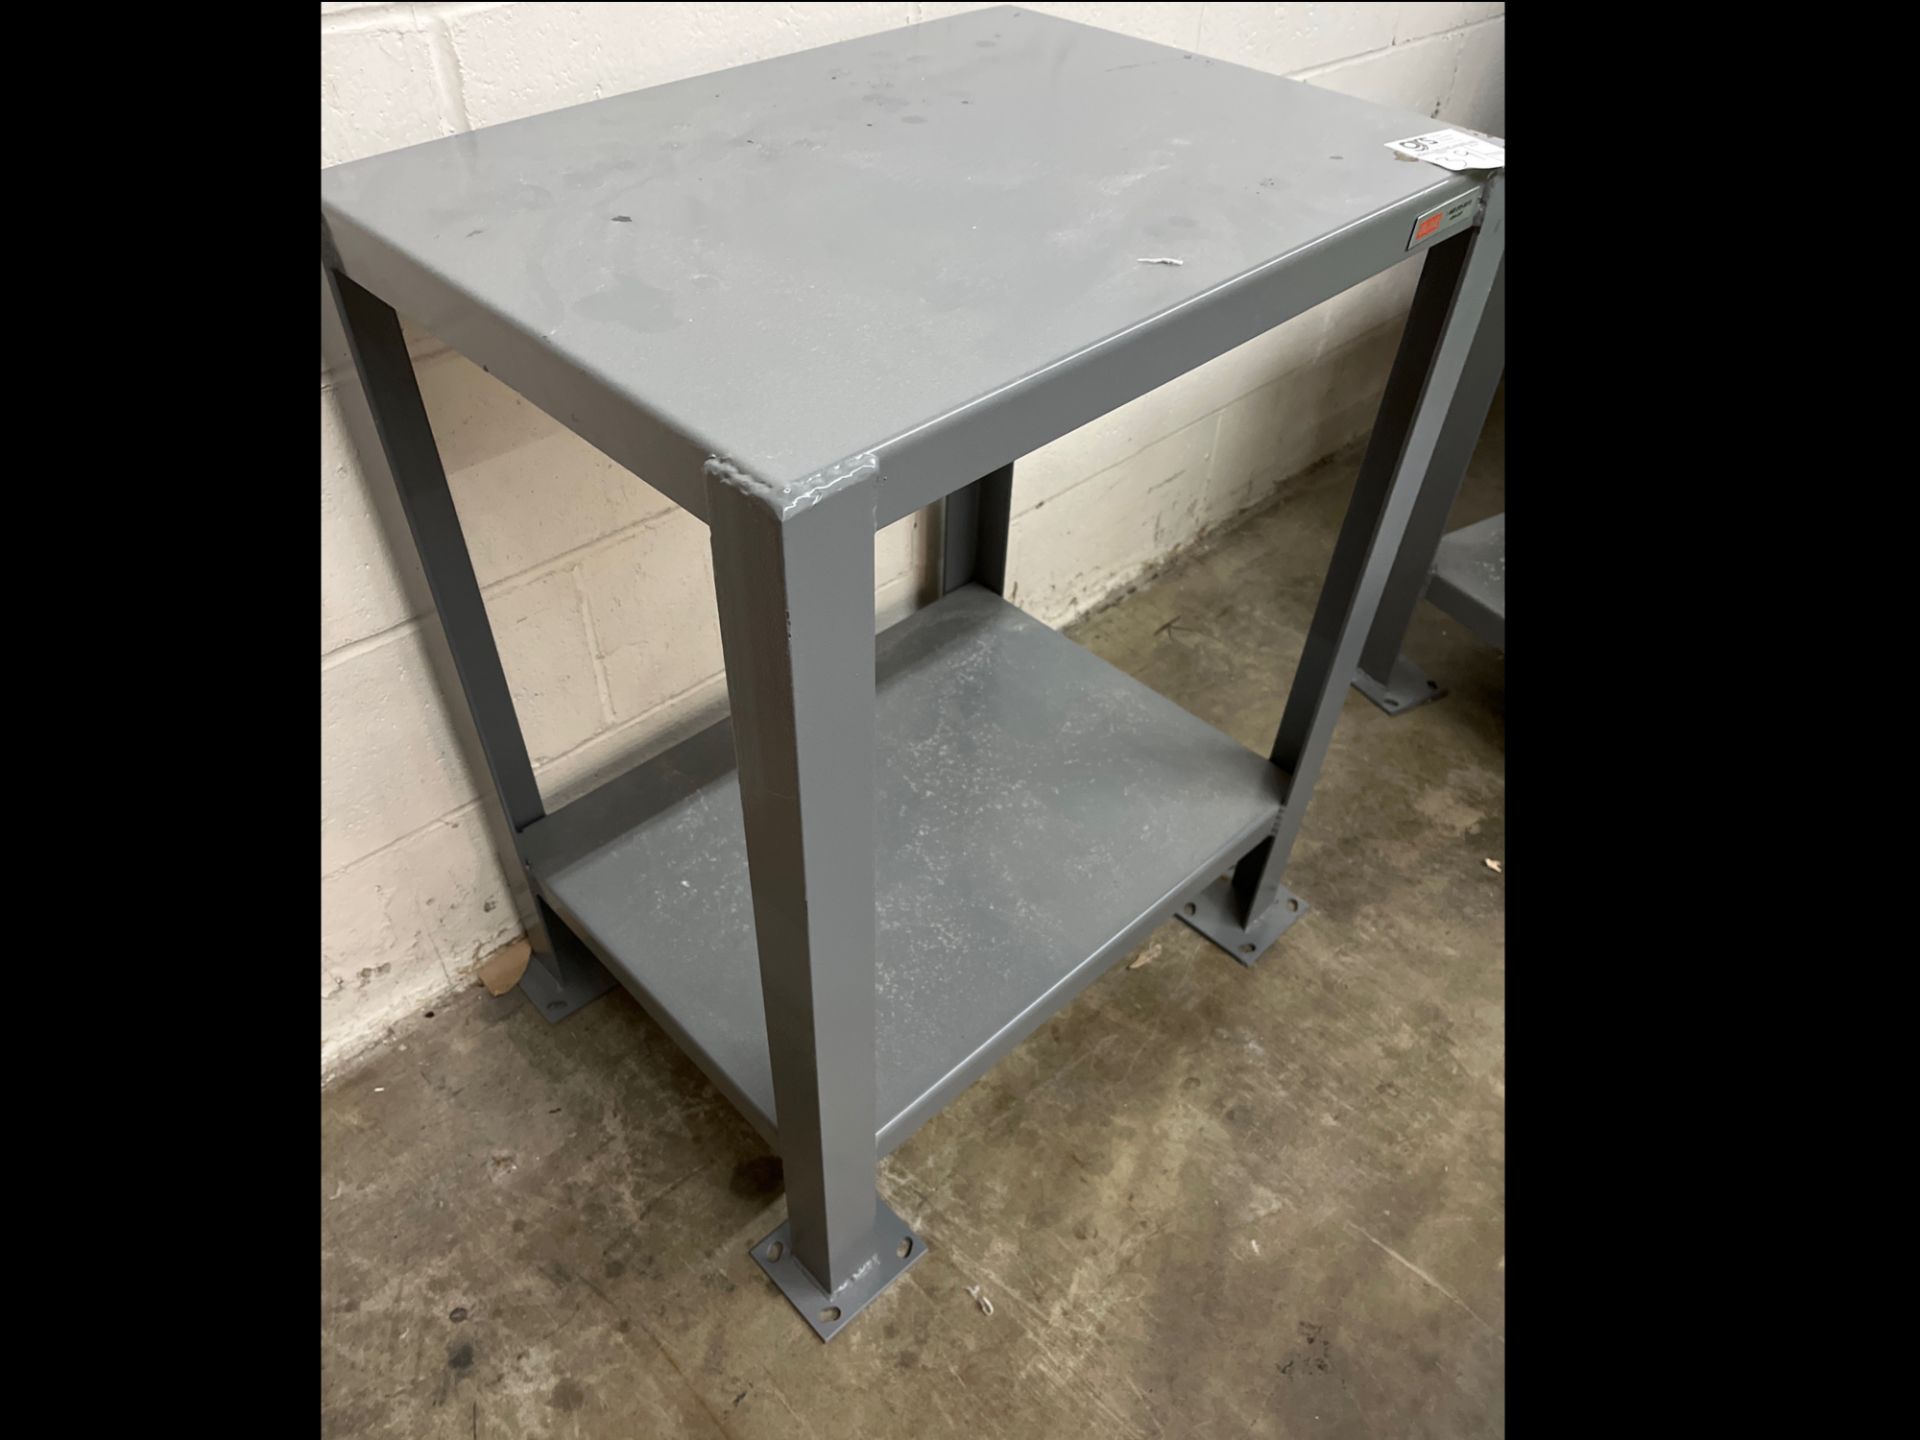 2-Tier Roll Out Steel Work Table - Image 2 of 3